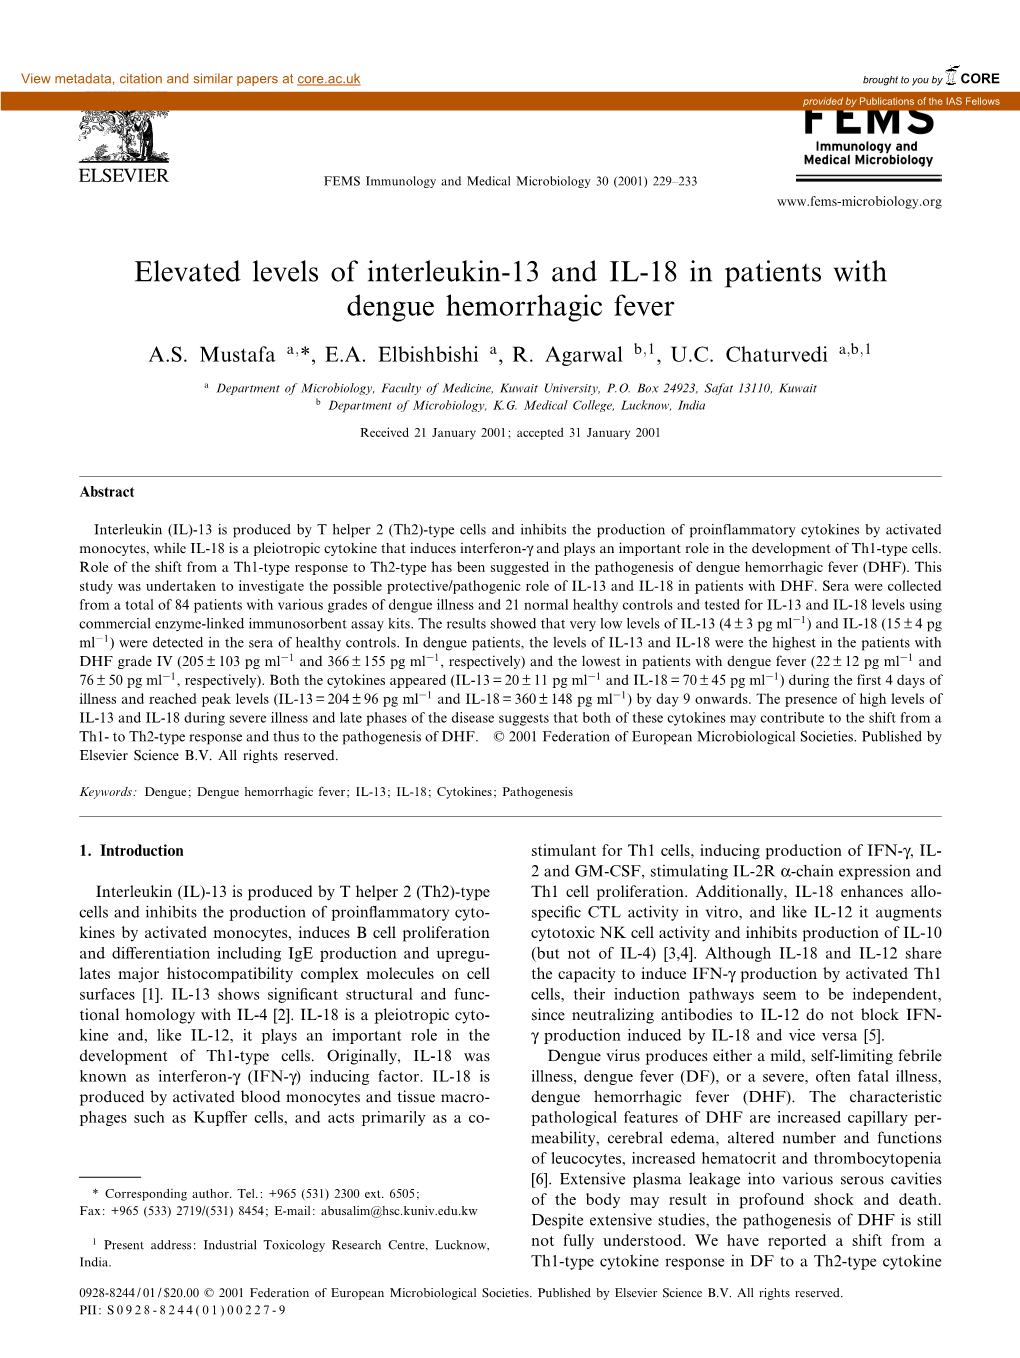 Elevated Levels of Interleukin-13 and IL-18 in Patients with Dengue Hemorrhagic Fever